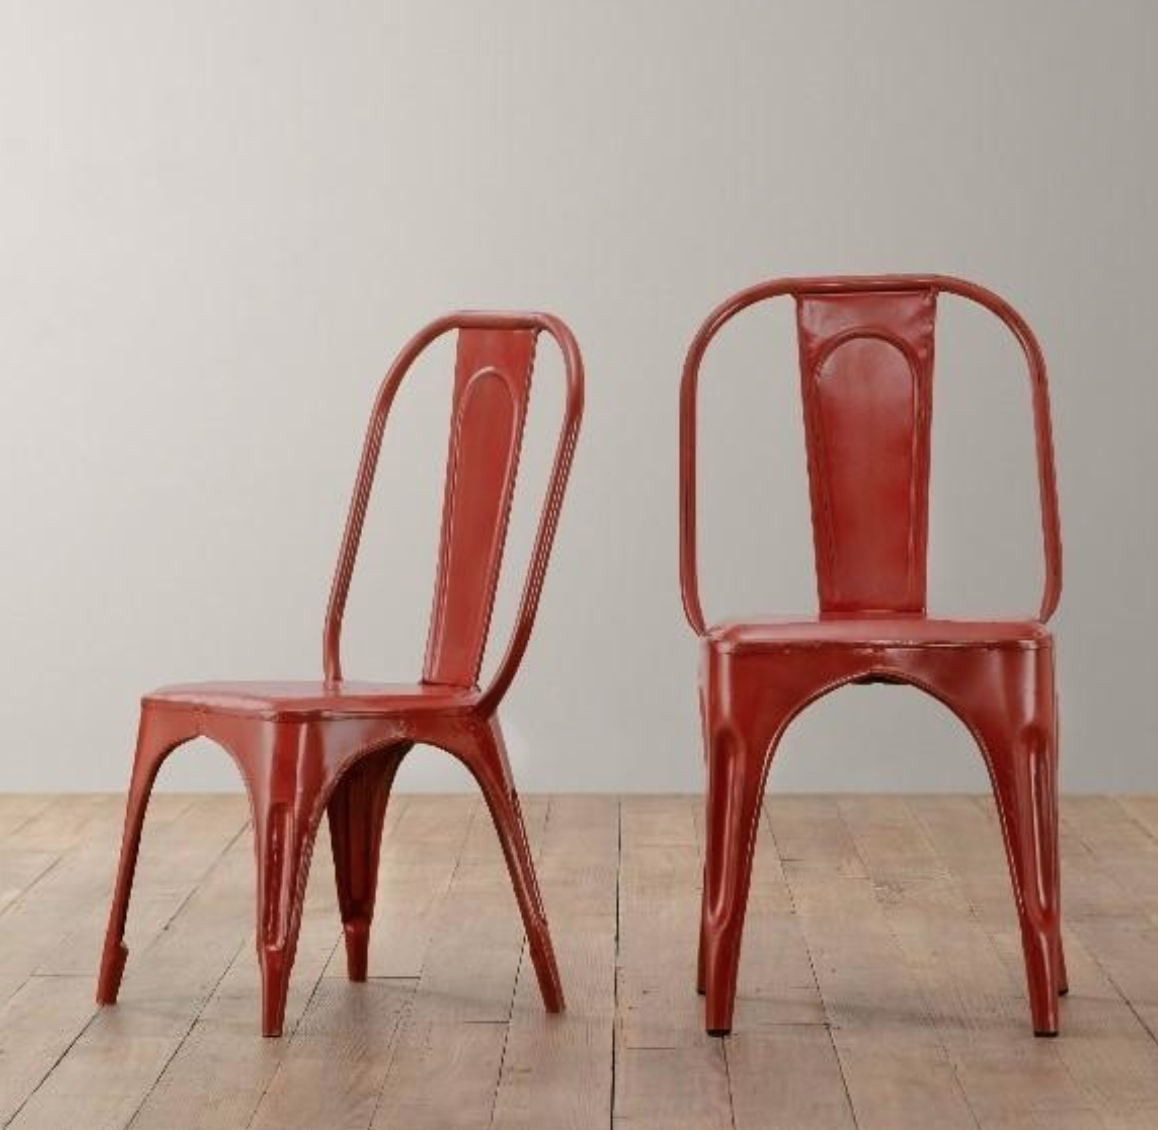 Children's chairs and stools